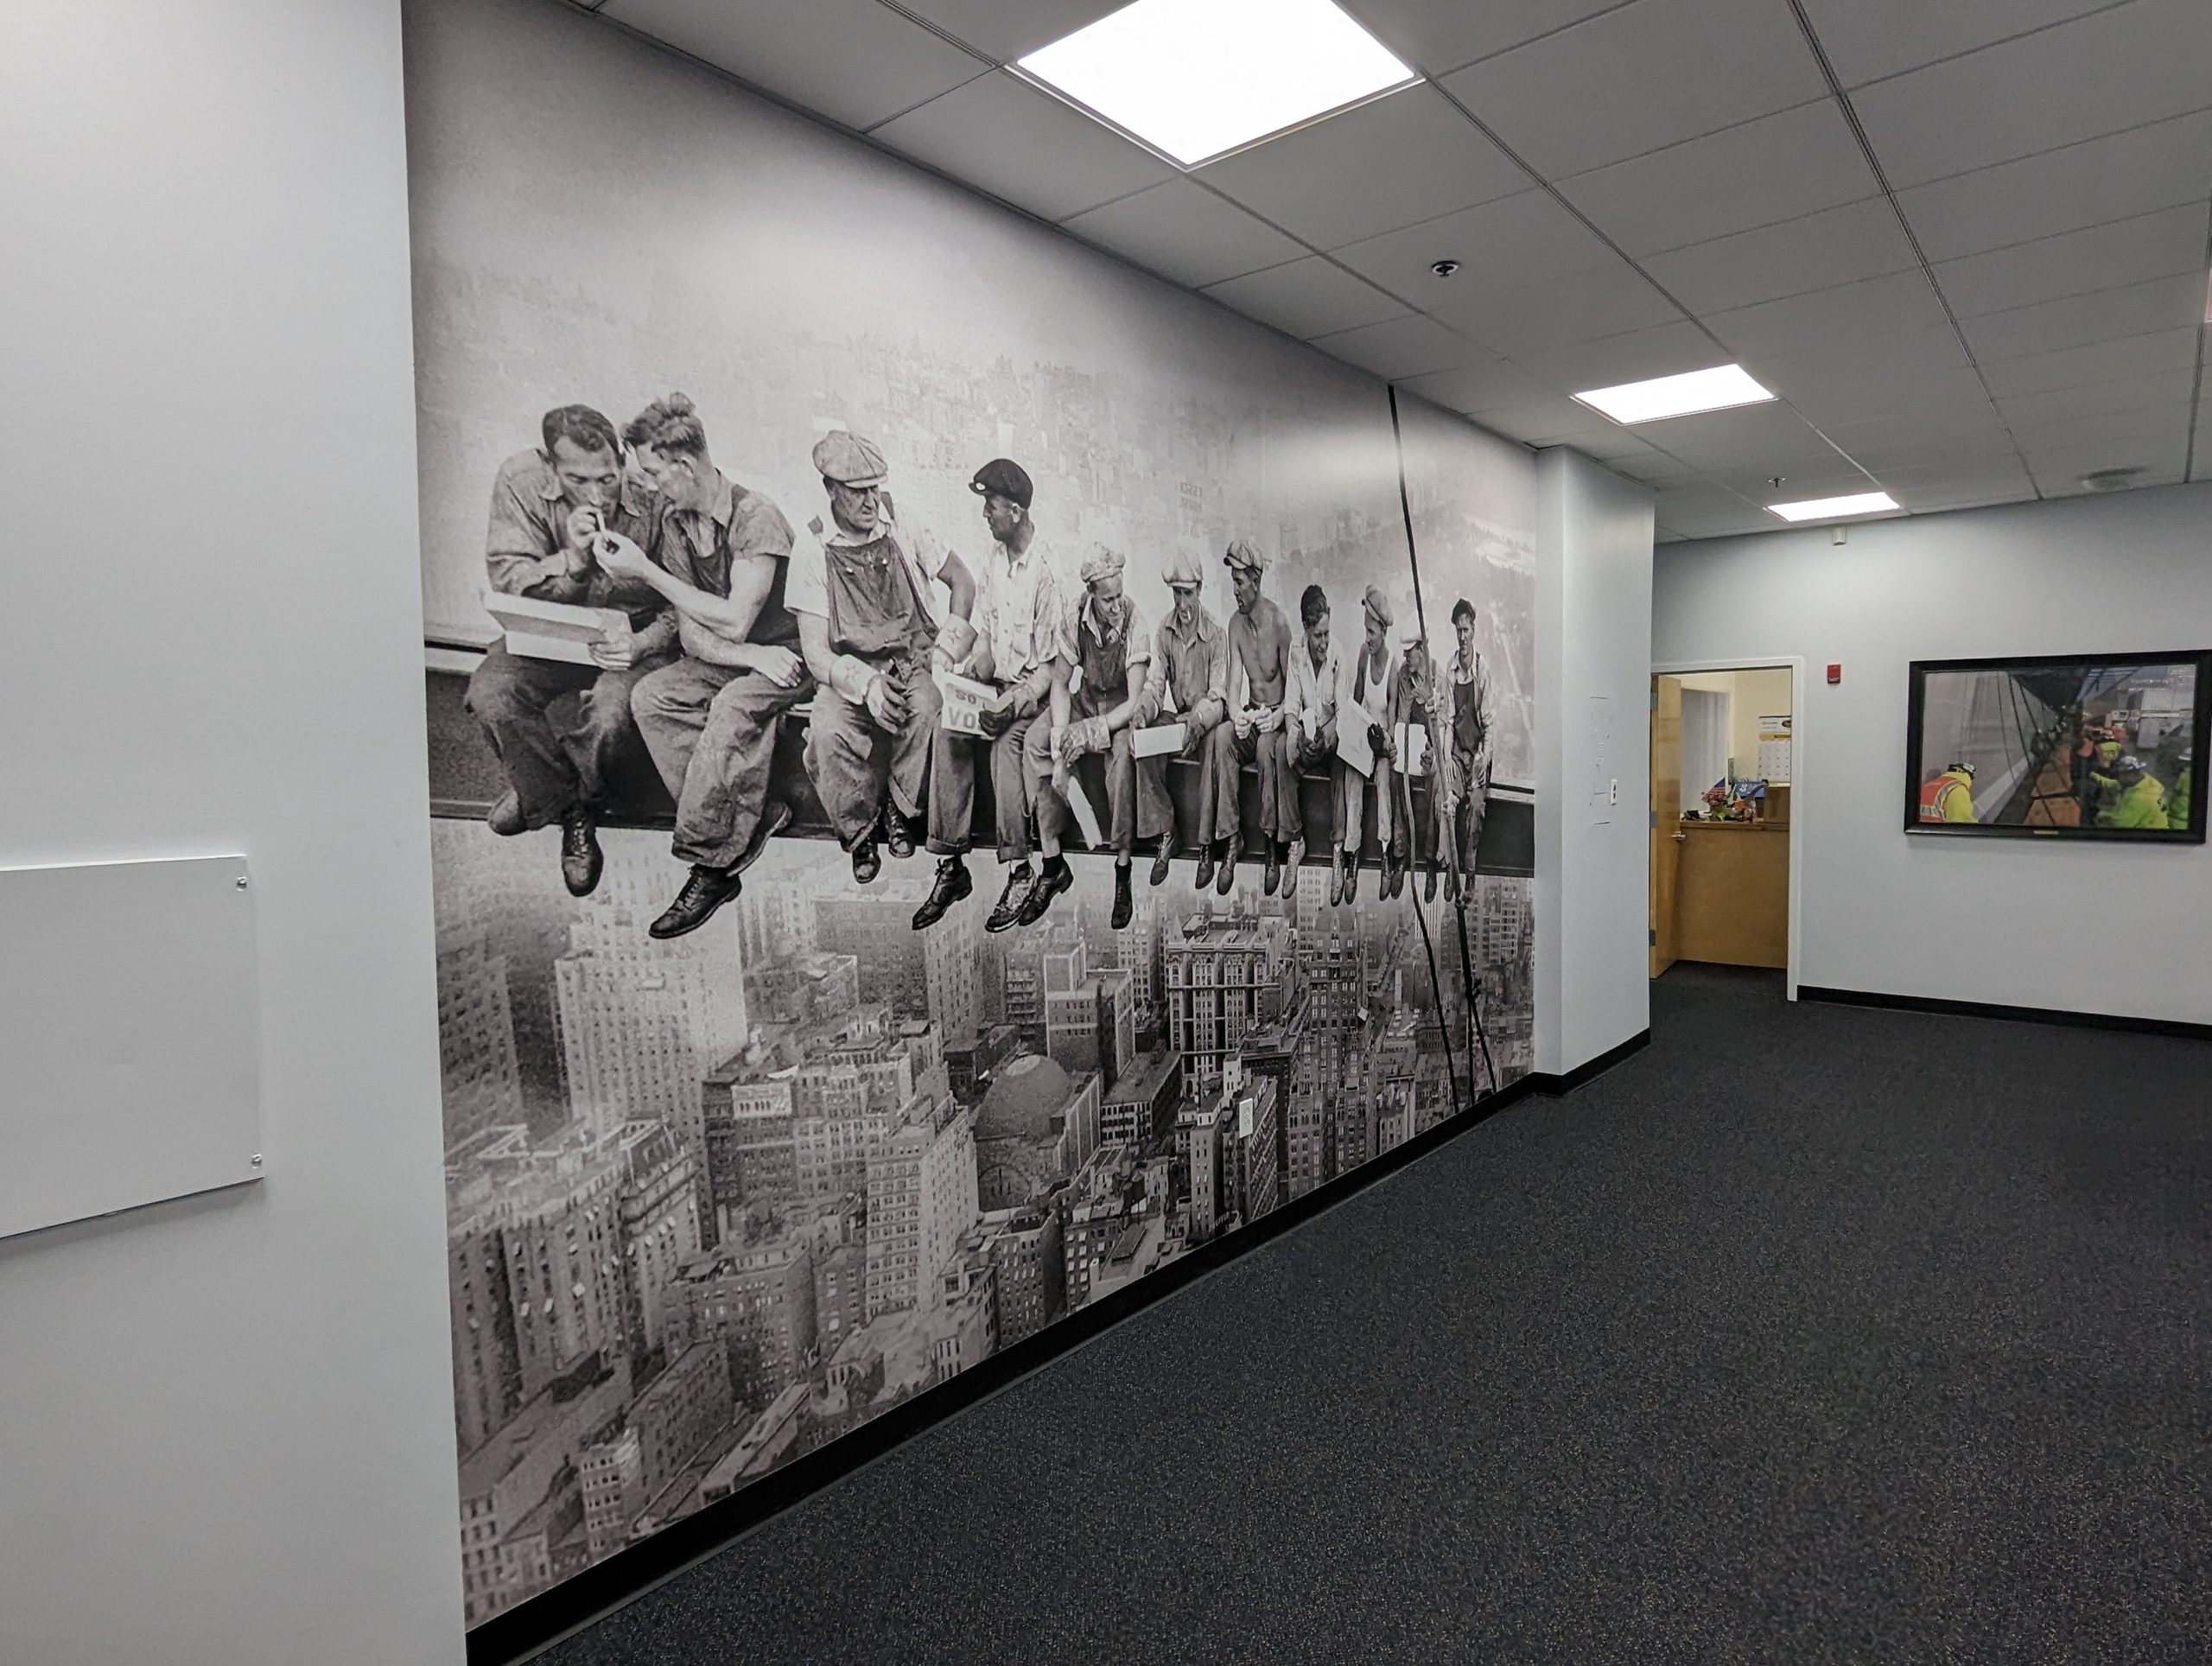 wall wraps company in nj city scaled